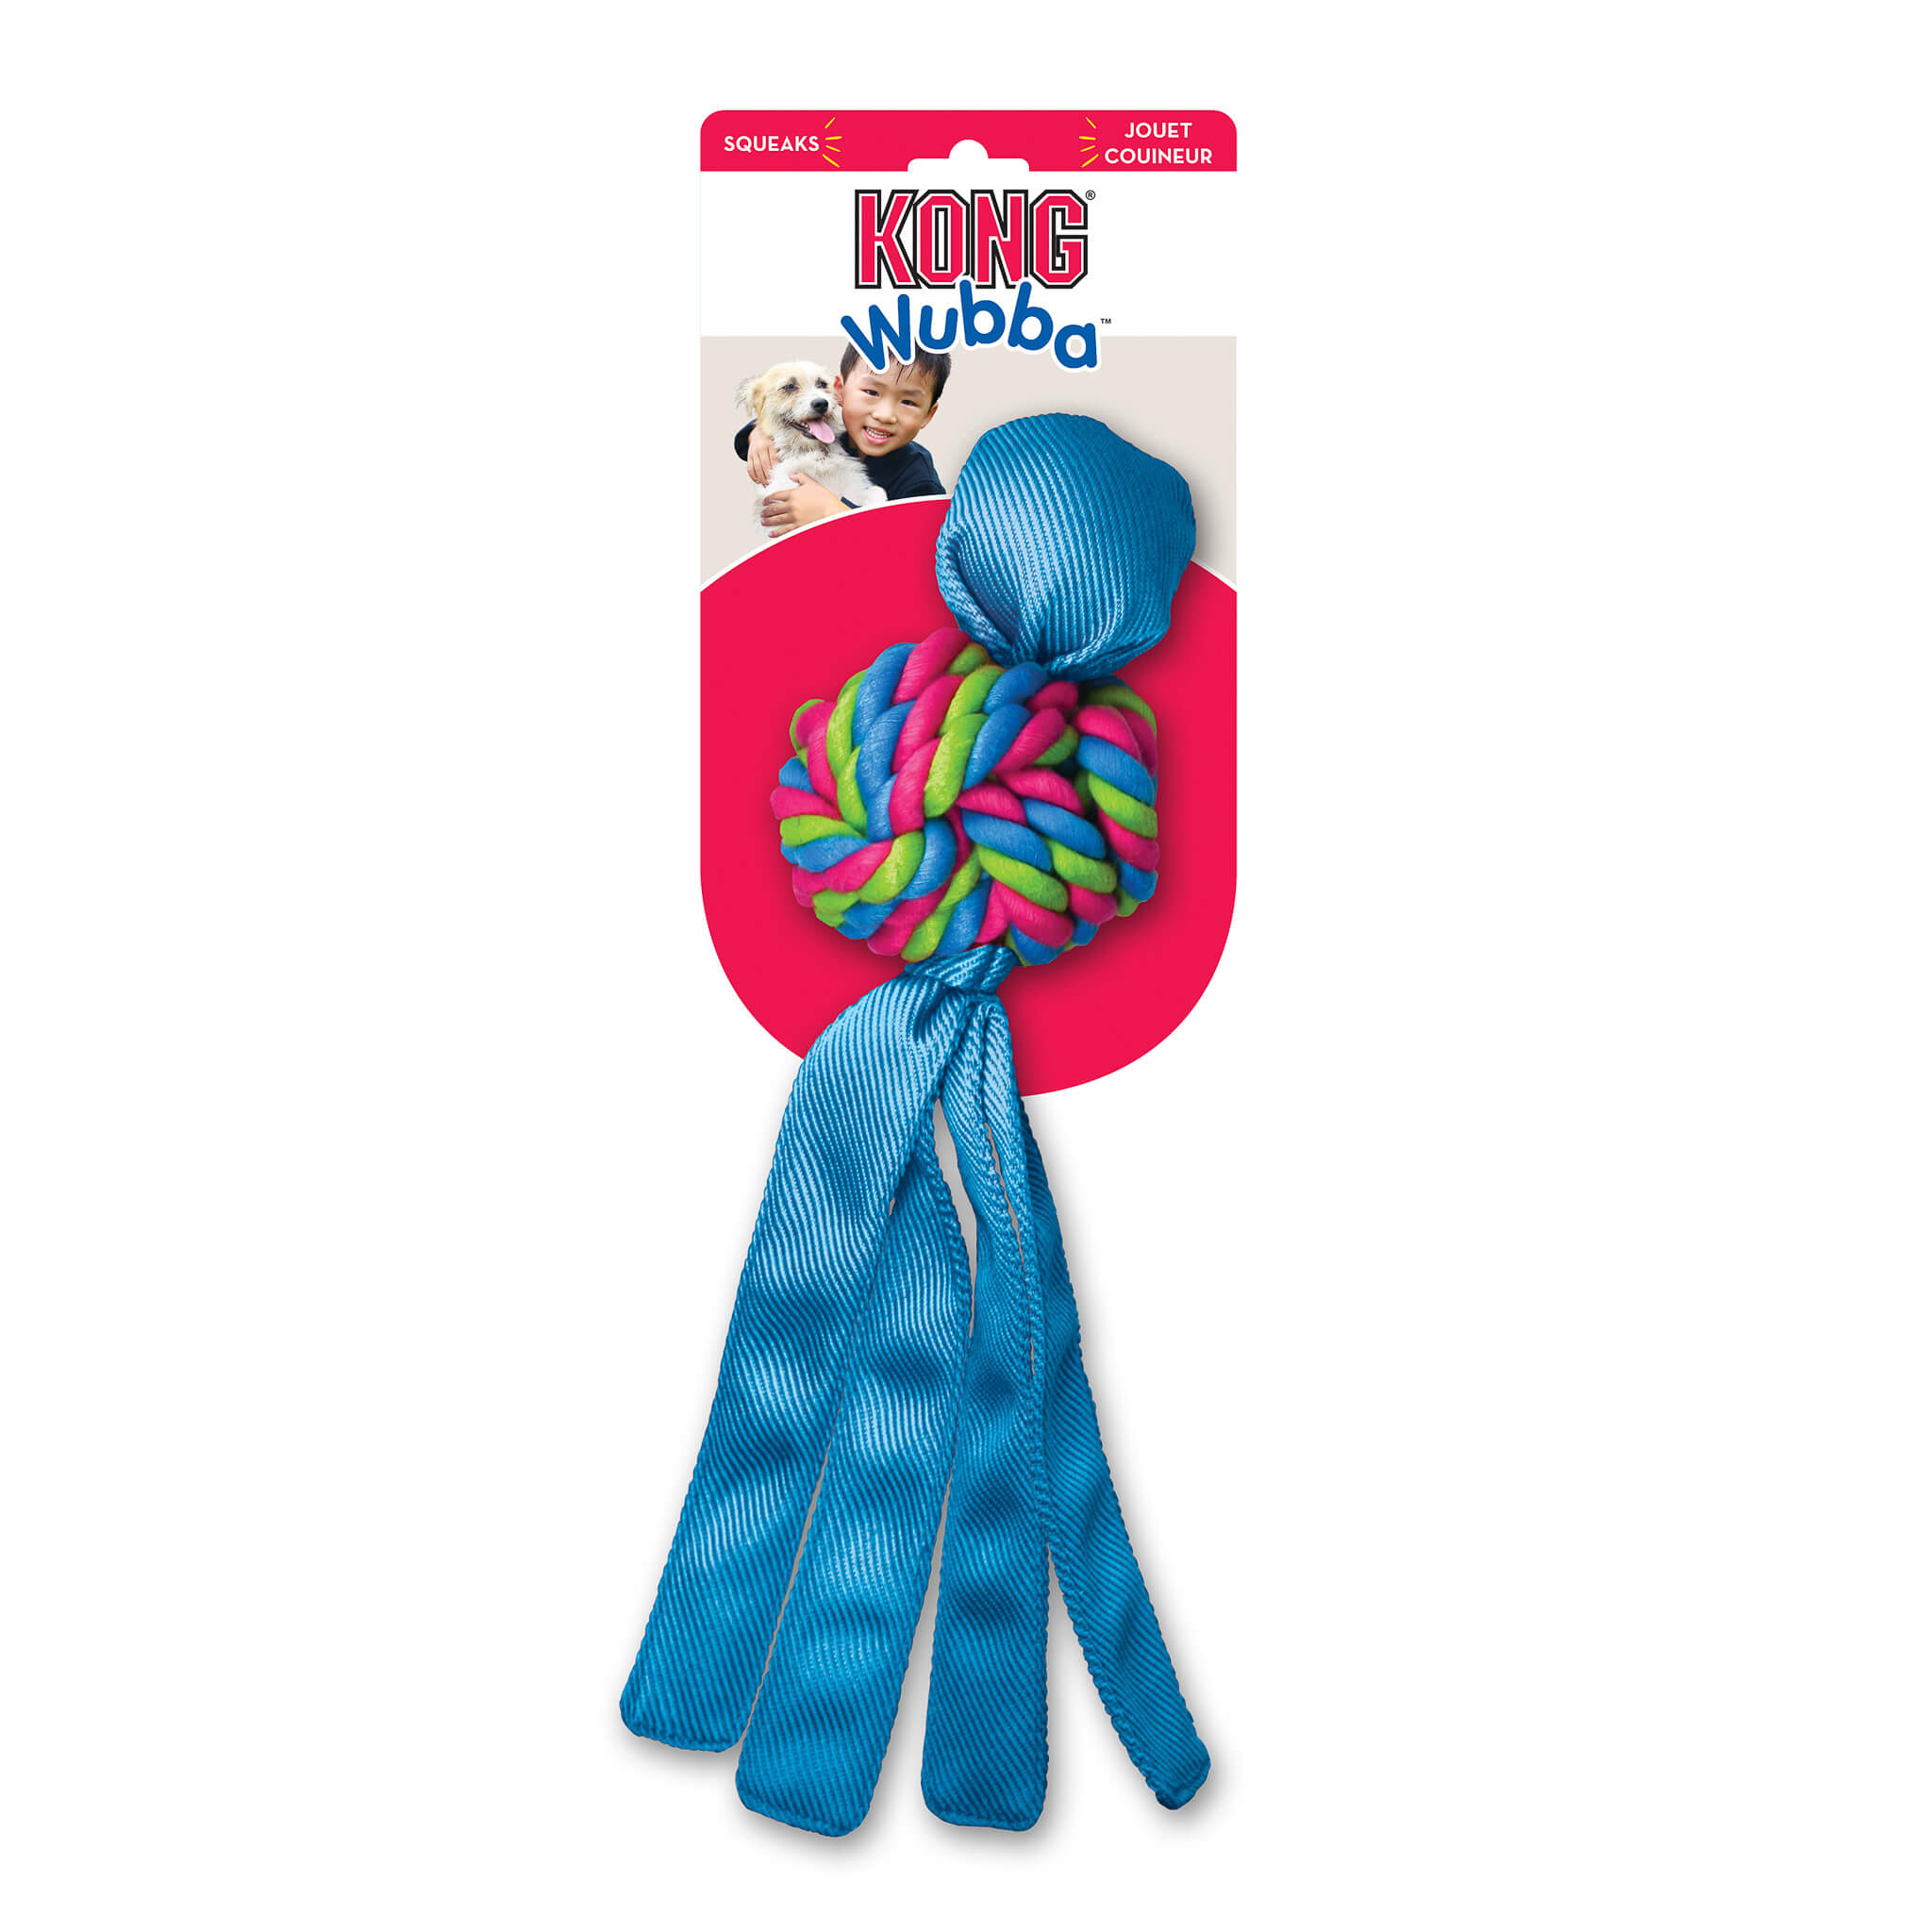 Kong dog toy - wubba weaves assorted